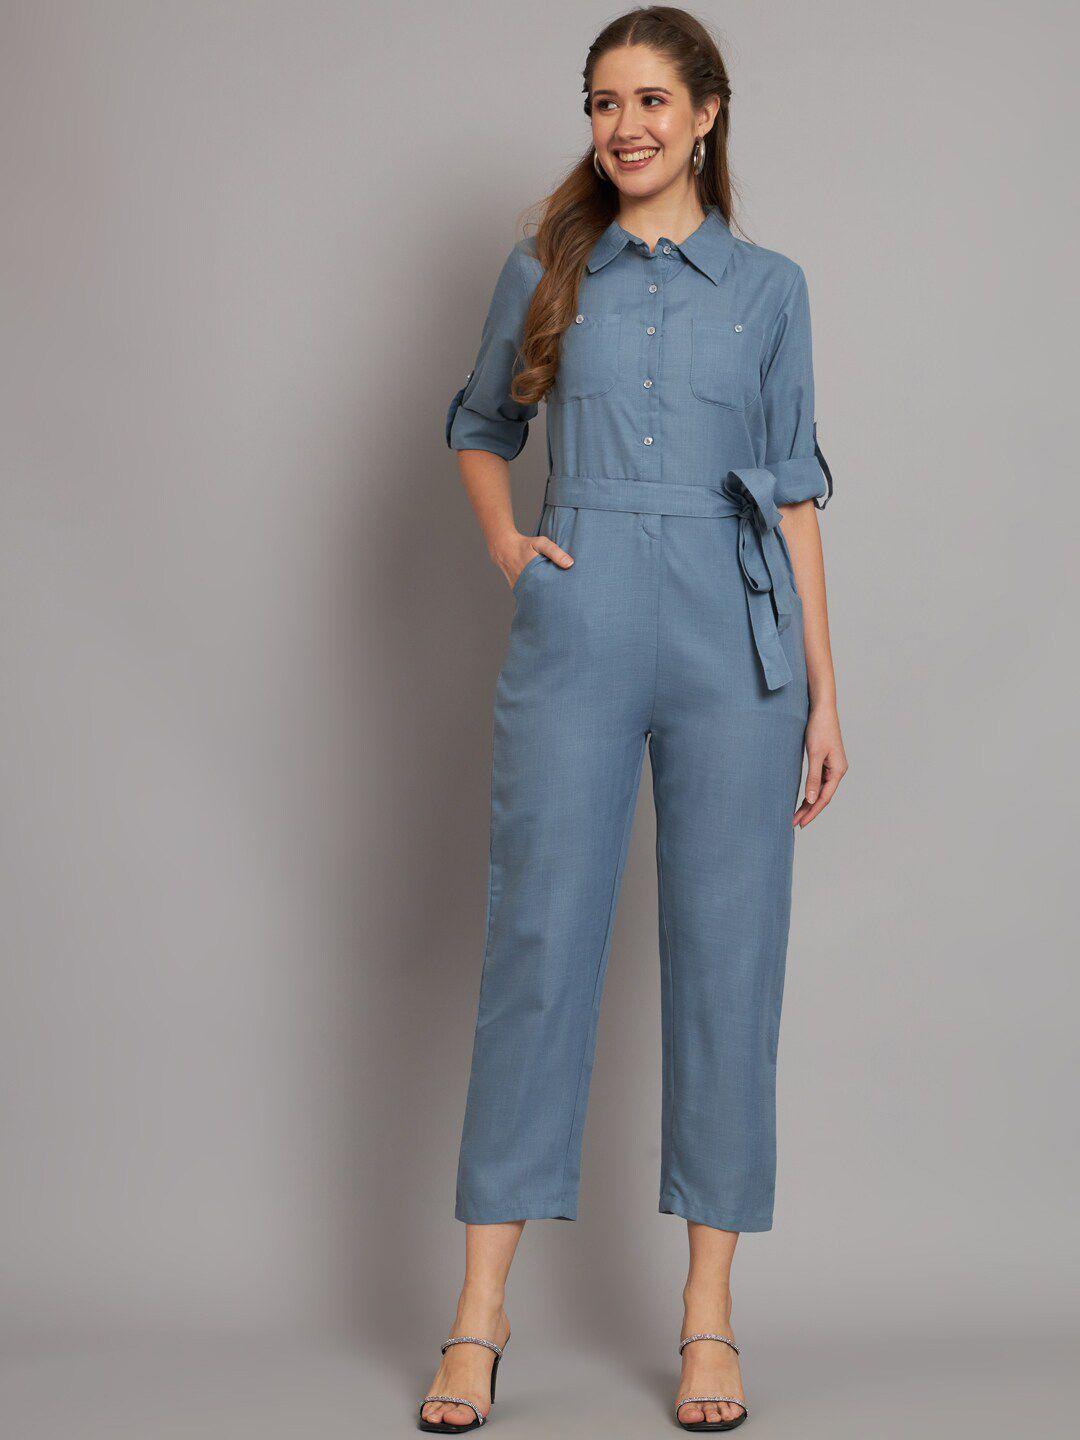 the dry state blue waist tie-ups roll-up sleeves shirt collar cotton basic jumpsuit